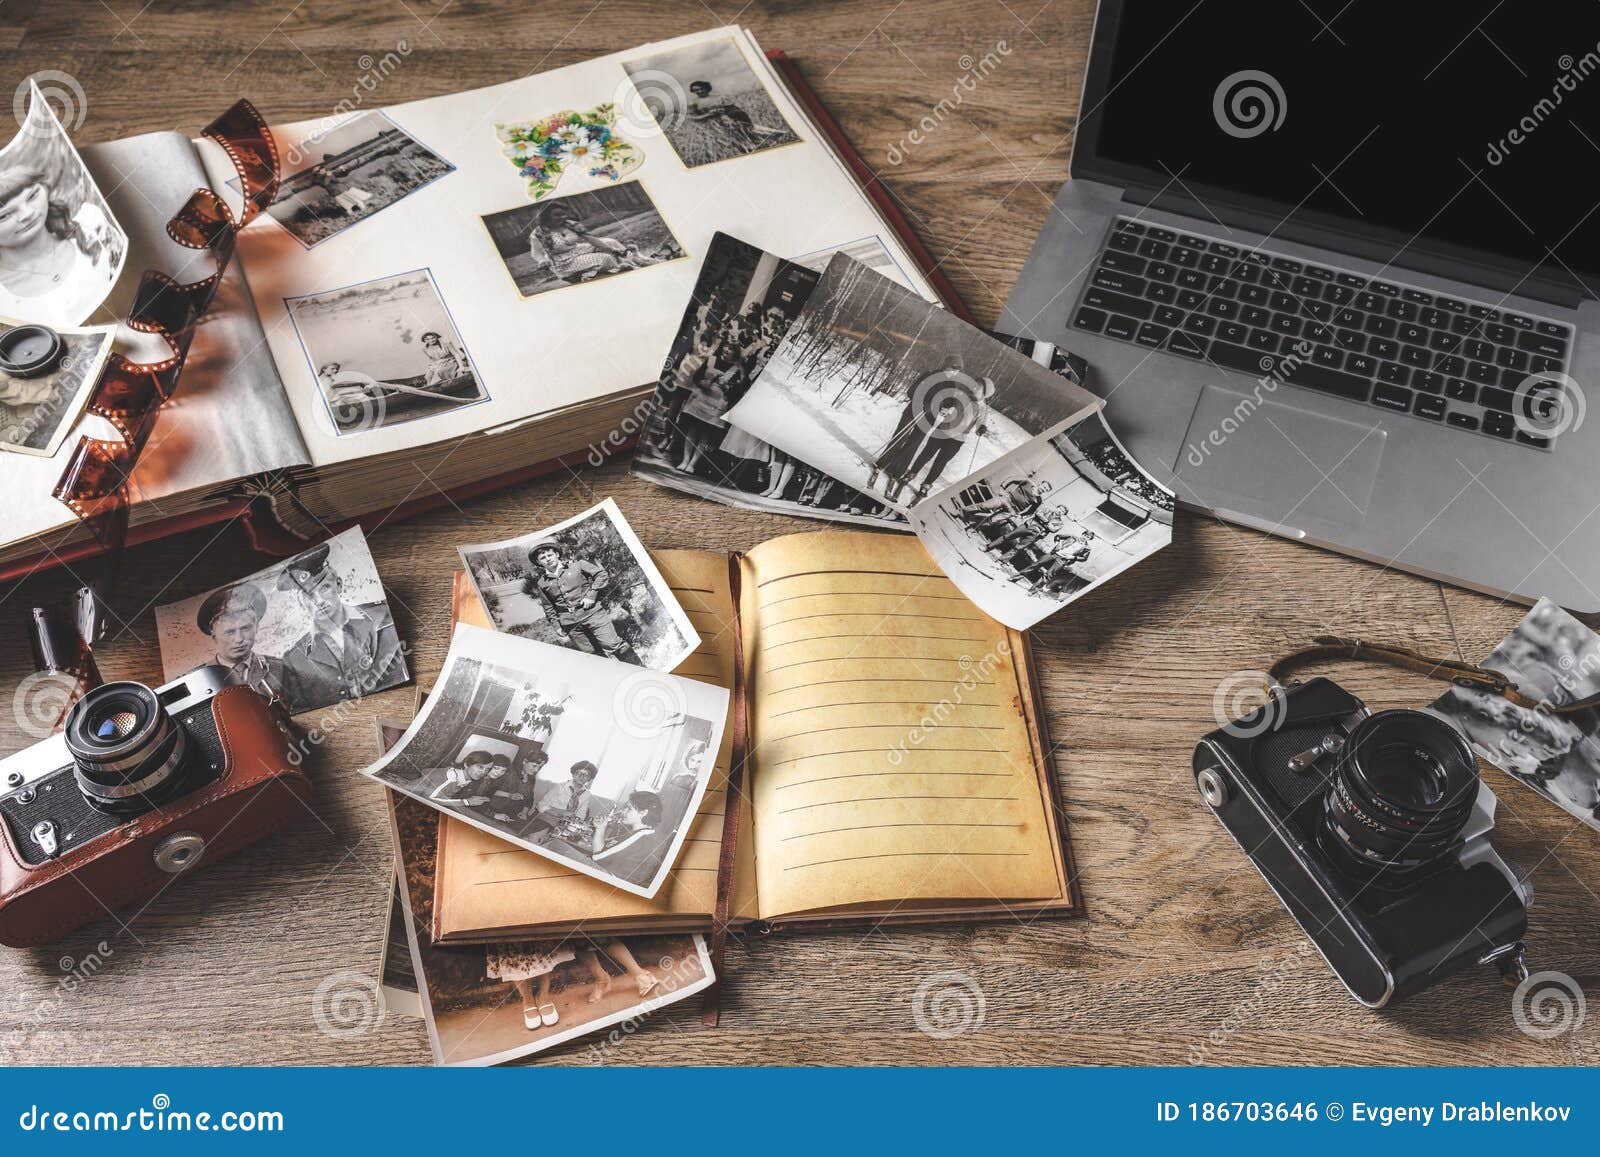 old family photos and album on wooden background. vintage pictures, camera, notepad and modern notebook